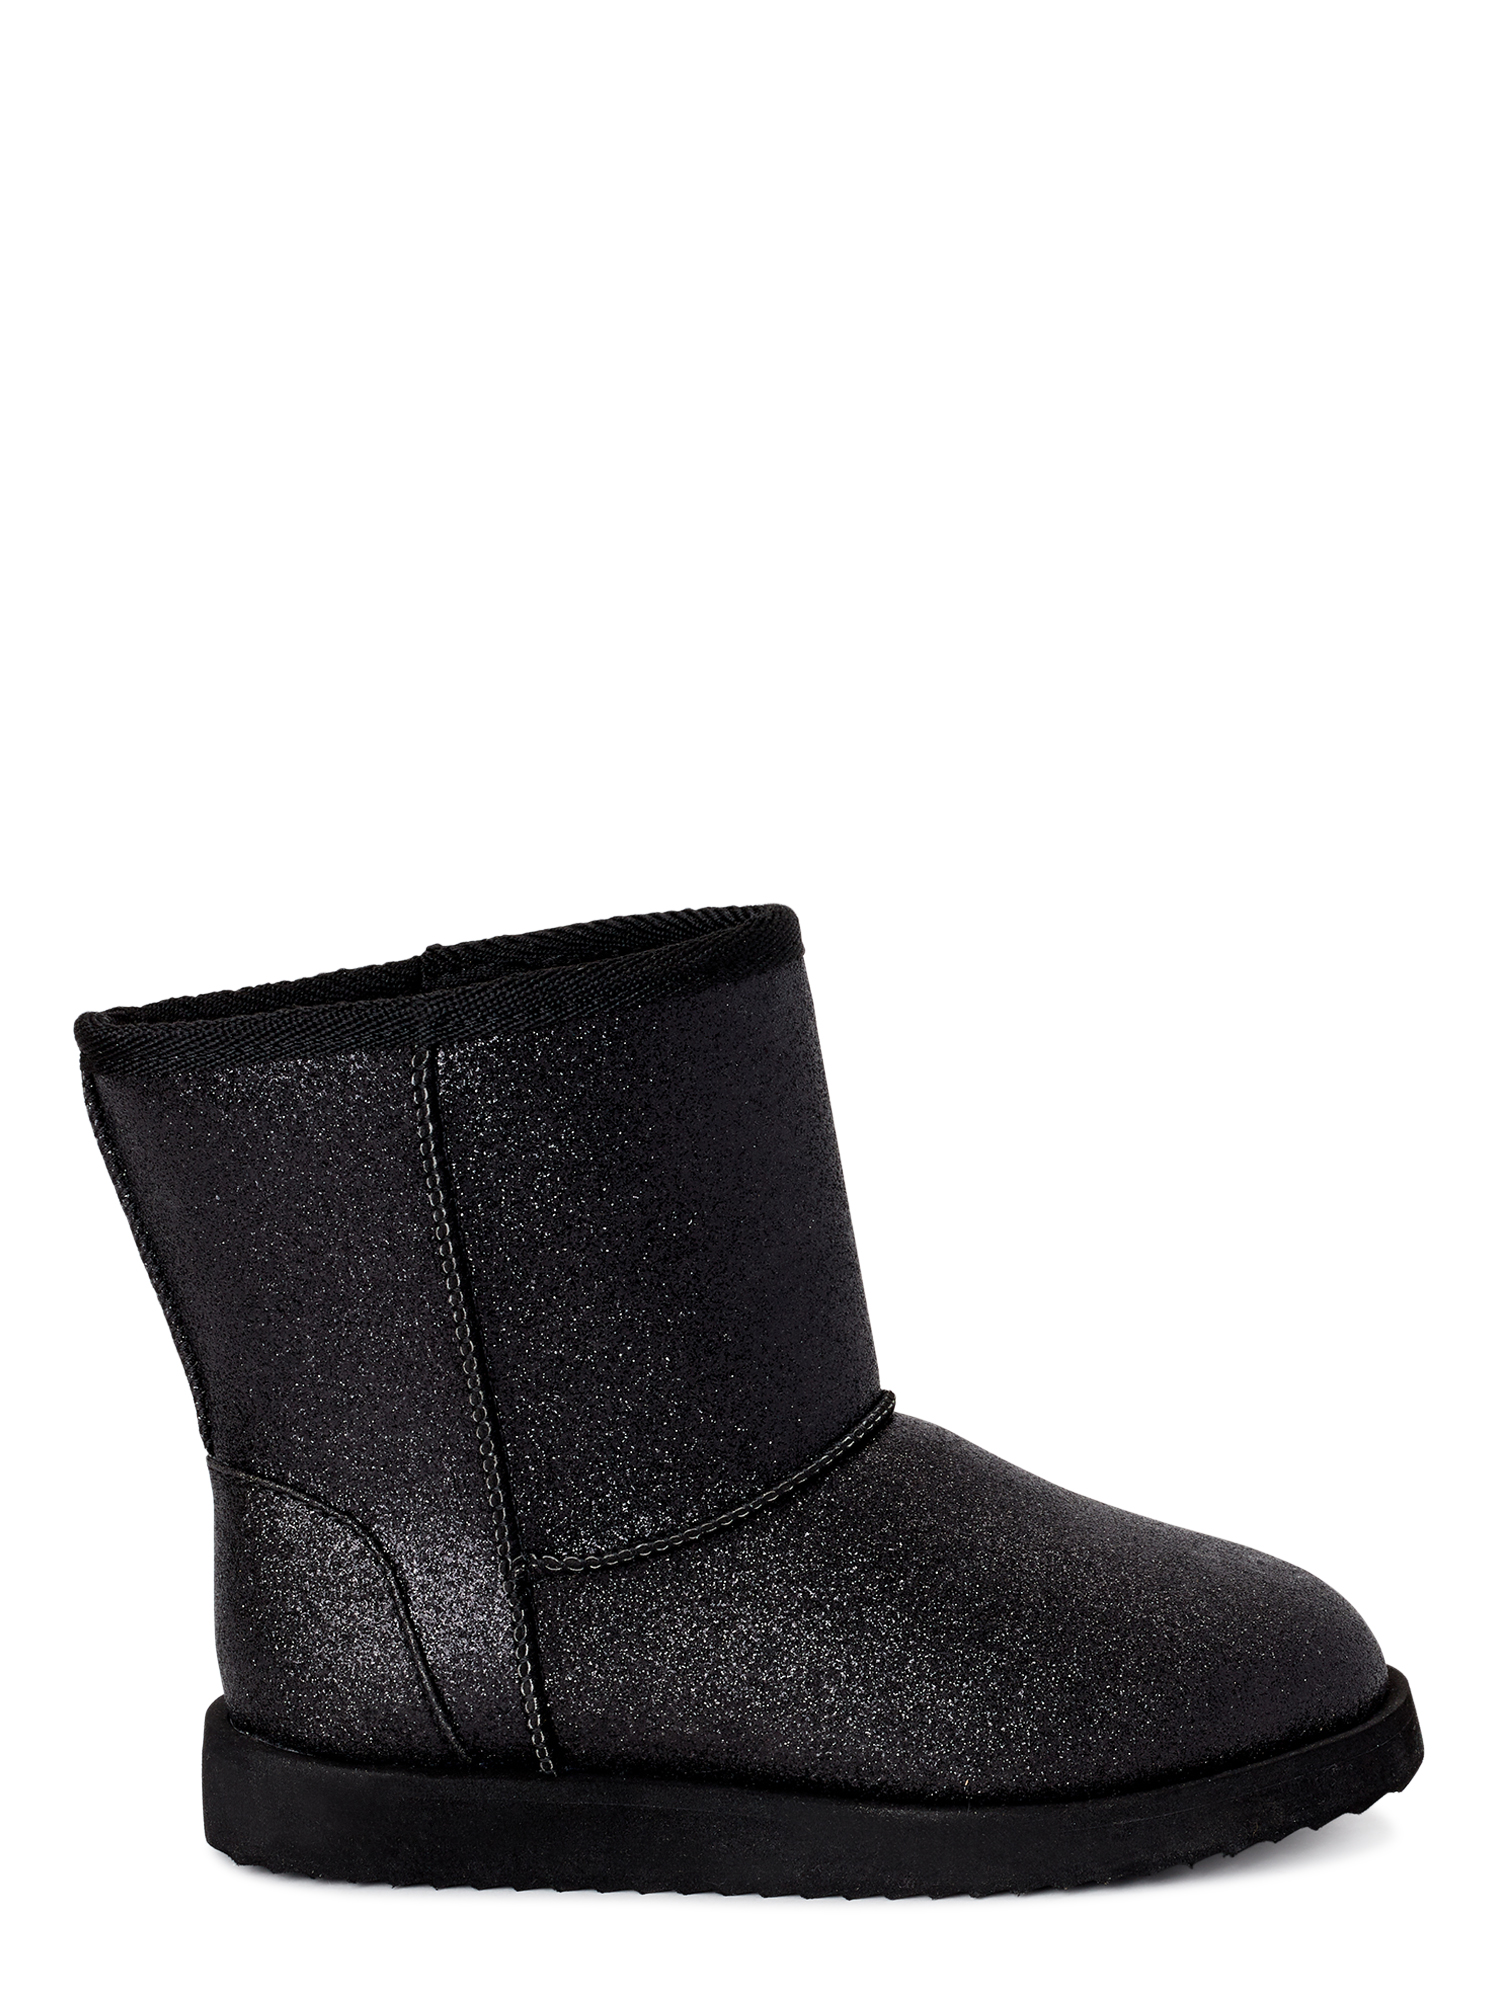 Wonder Nation Cozy Faux Shearling Boot (Little Girls & Big Girls) - image 3 of 6